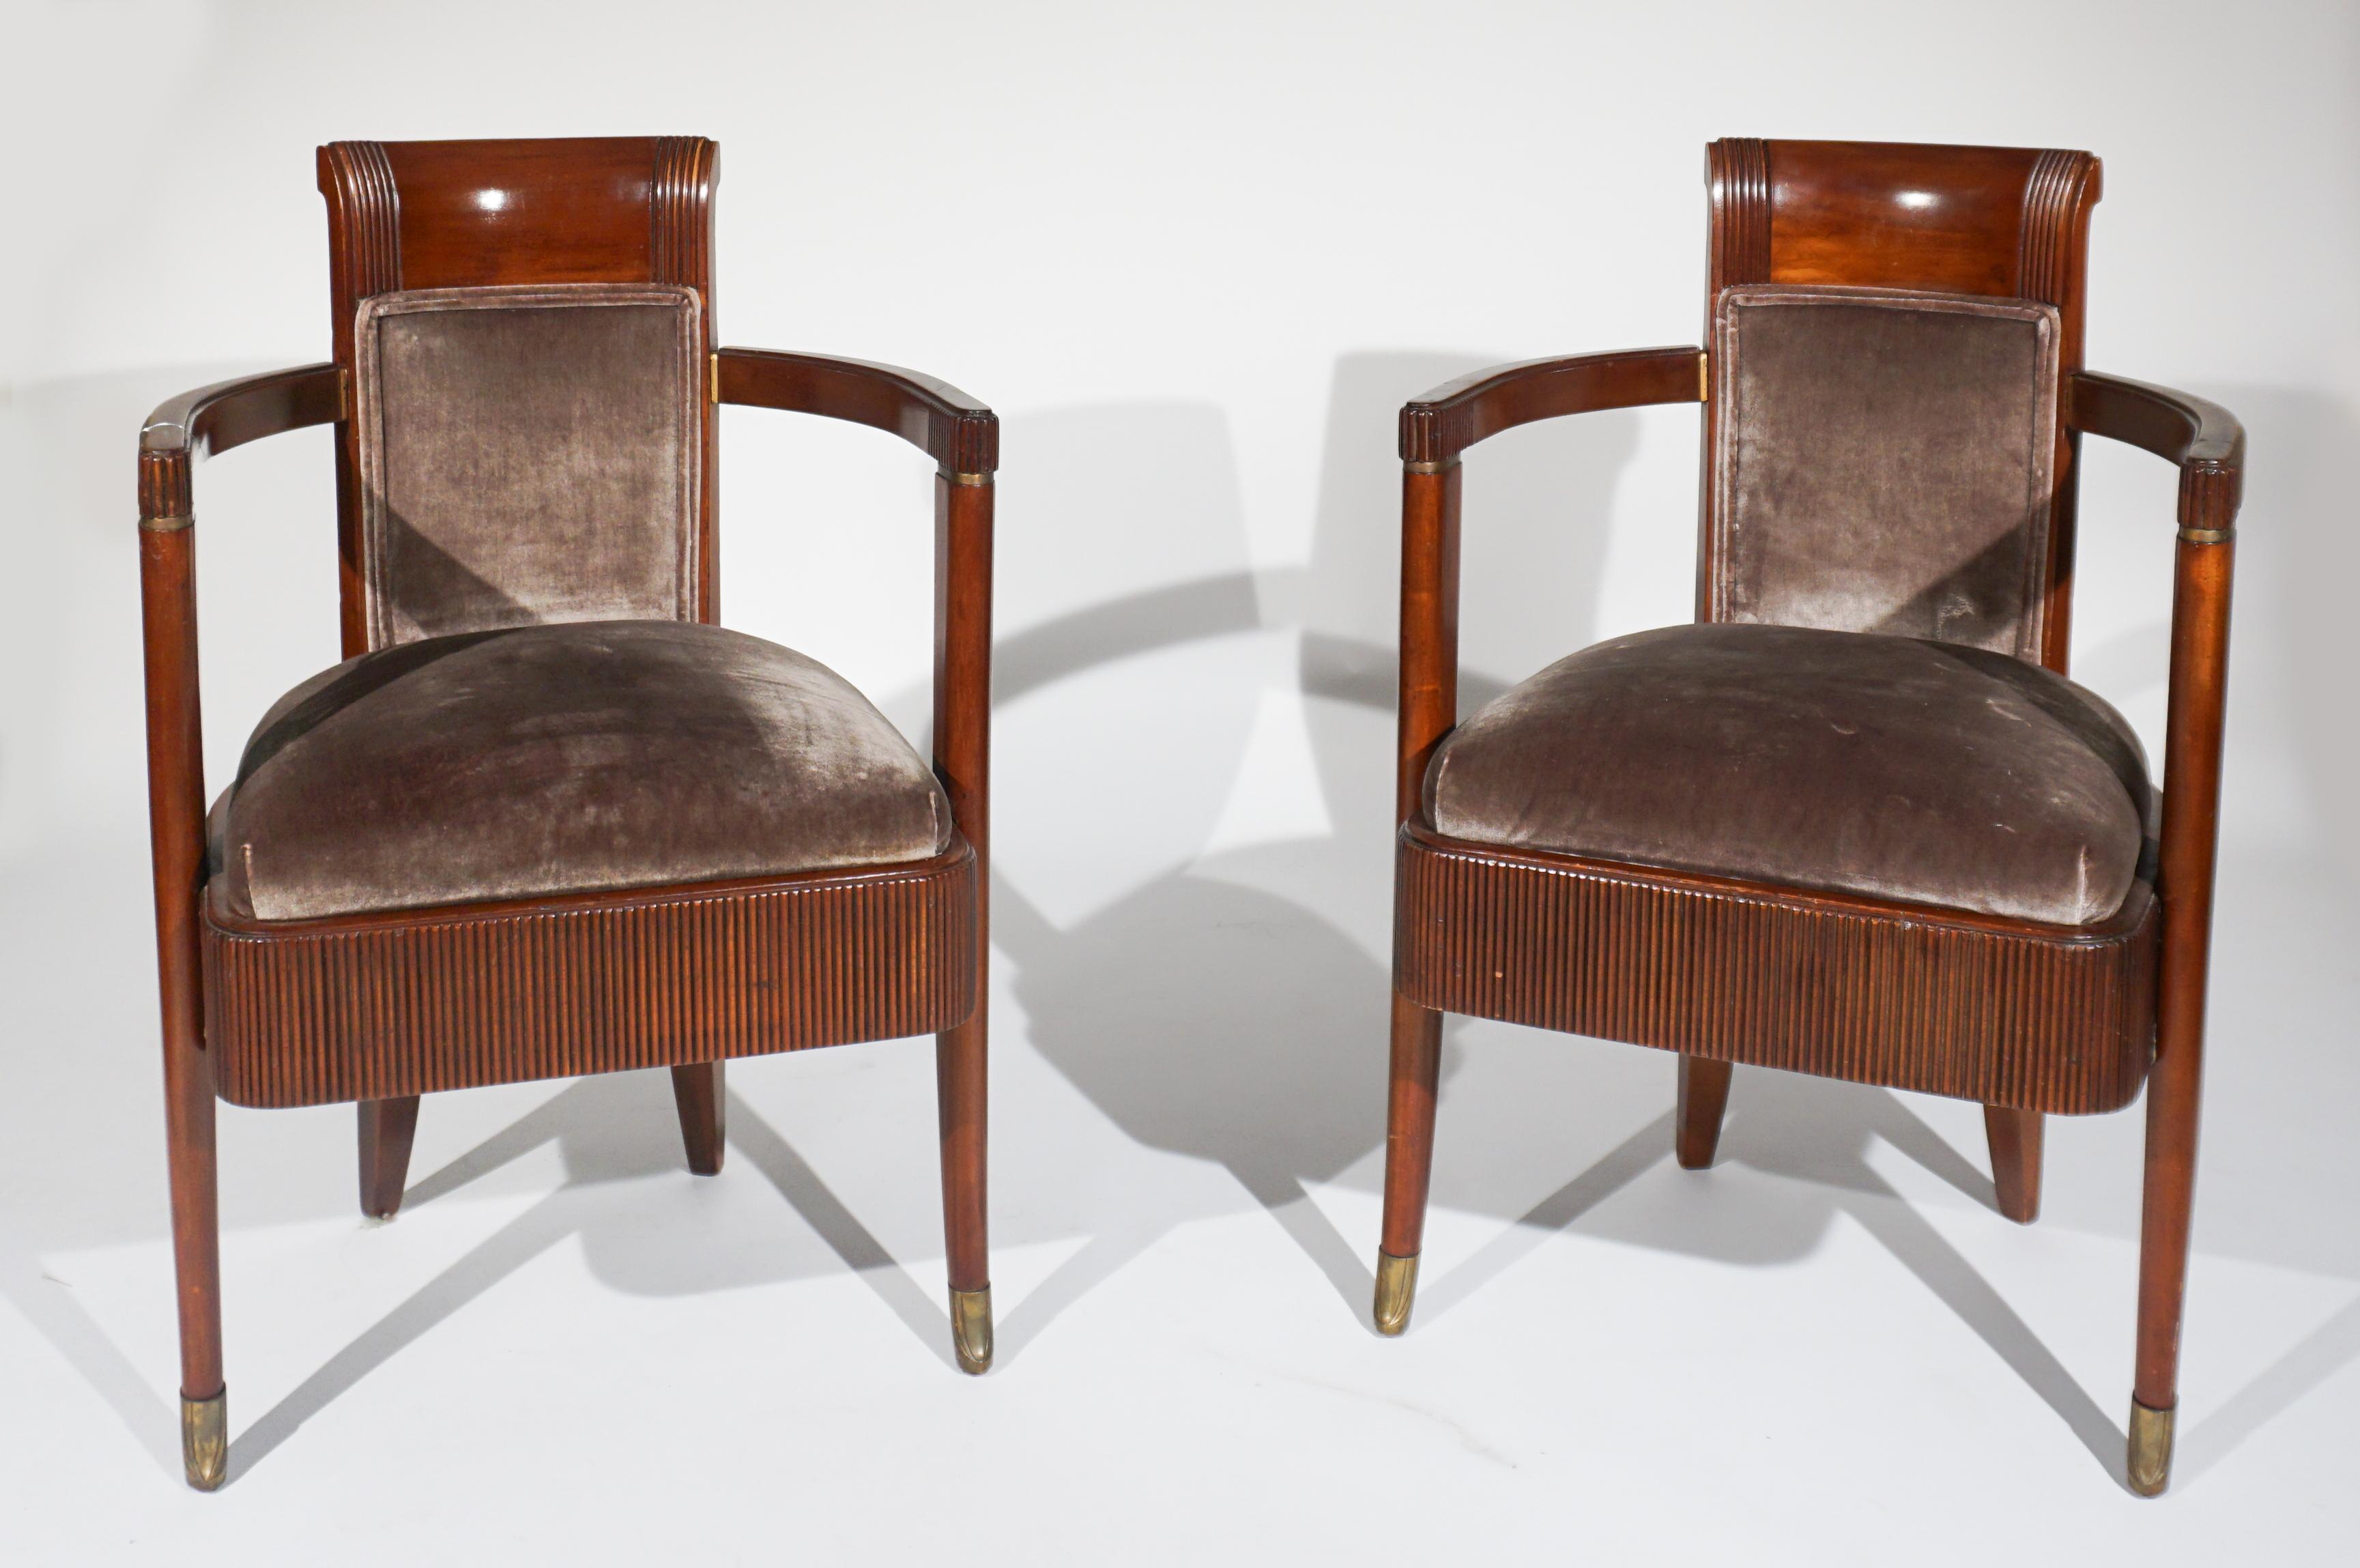 Pair Of Art Deco Silk Velvet Upholstered Mahogany 'S.S. Normandie' Dining Armchairs, Pierre Patout (French 1879-1965), Circa 1934. This Pair of Art Deco Mahogany Arm chairs upholstered in dark brown Silk Velvet were designed by Pierre Patout to be